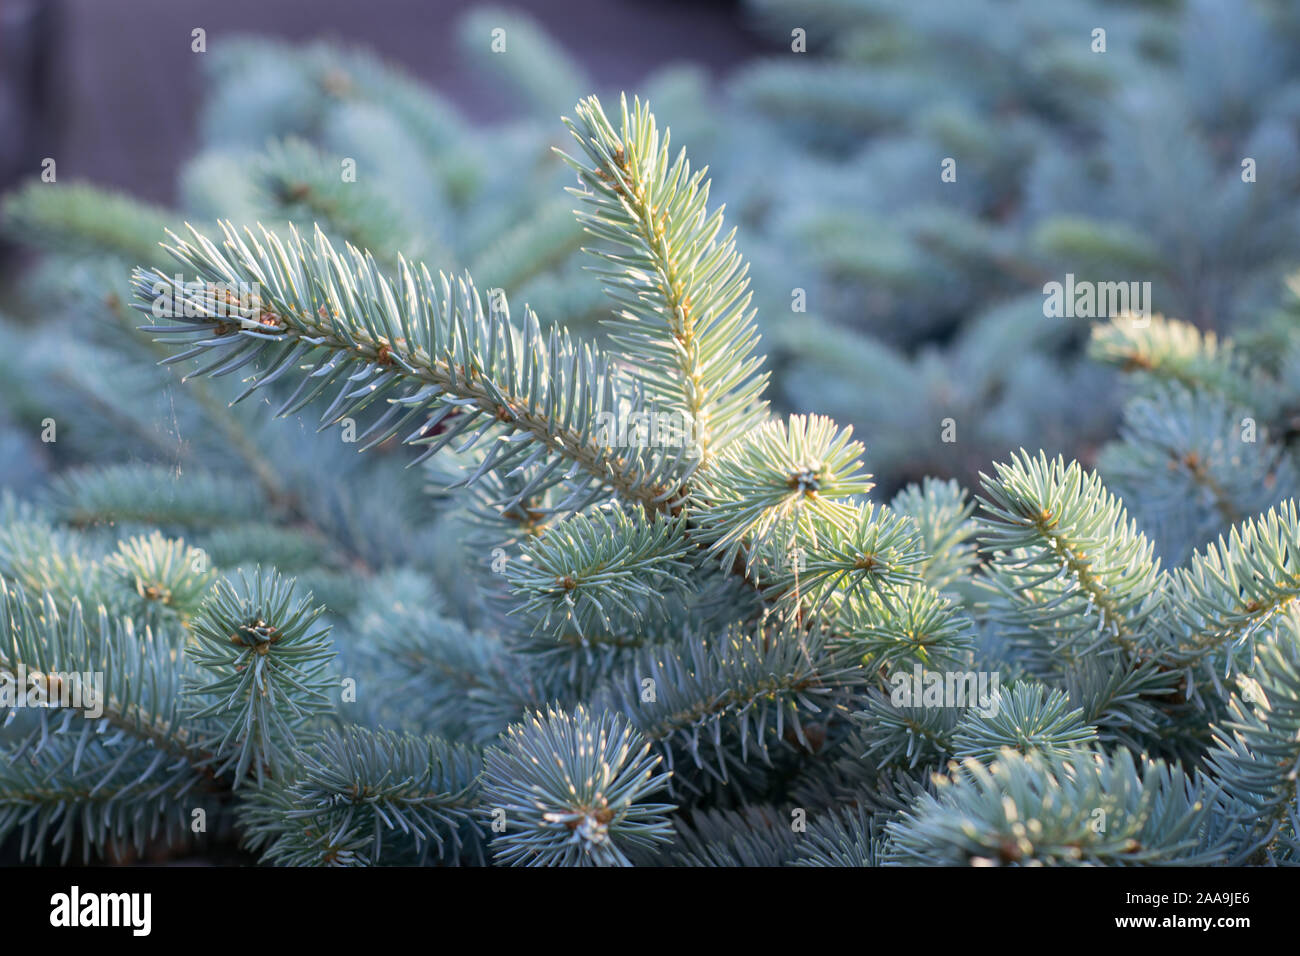 Beautiful blue silver colored Colorado spruce (Picea pungens 'Glauca' ) in the evening light Stock Photo